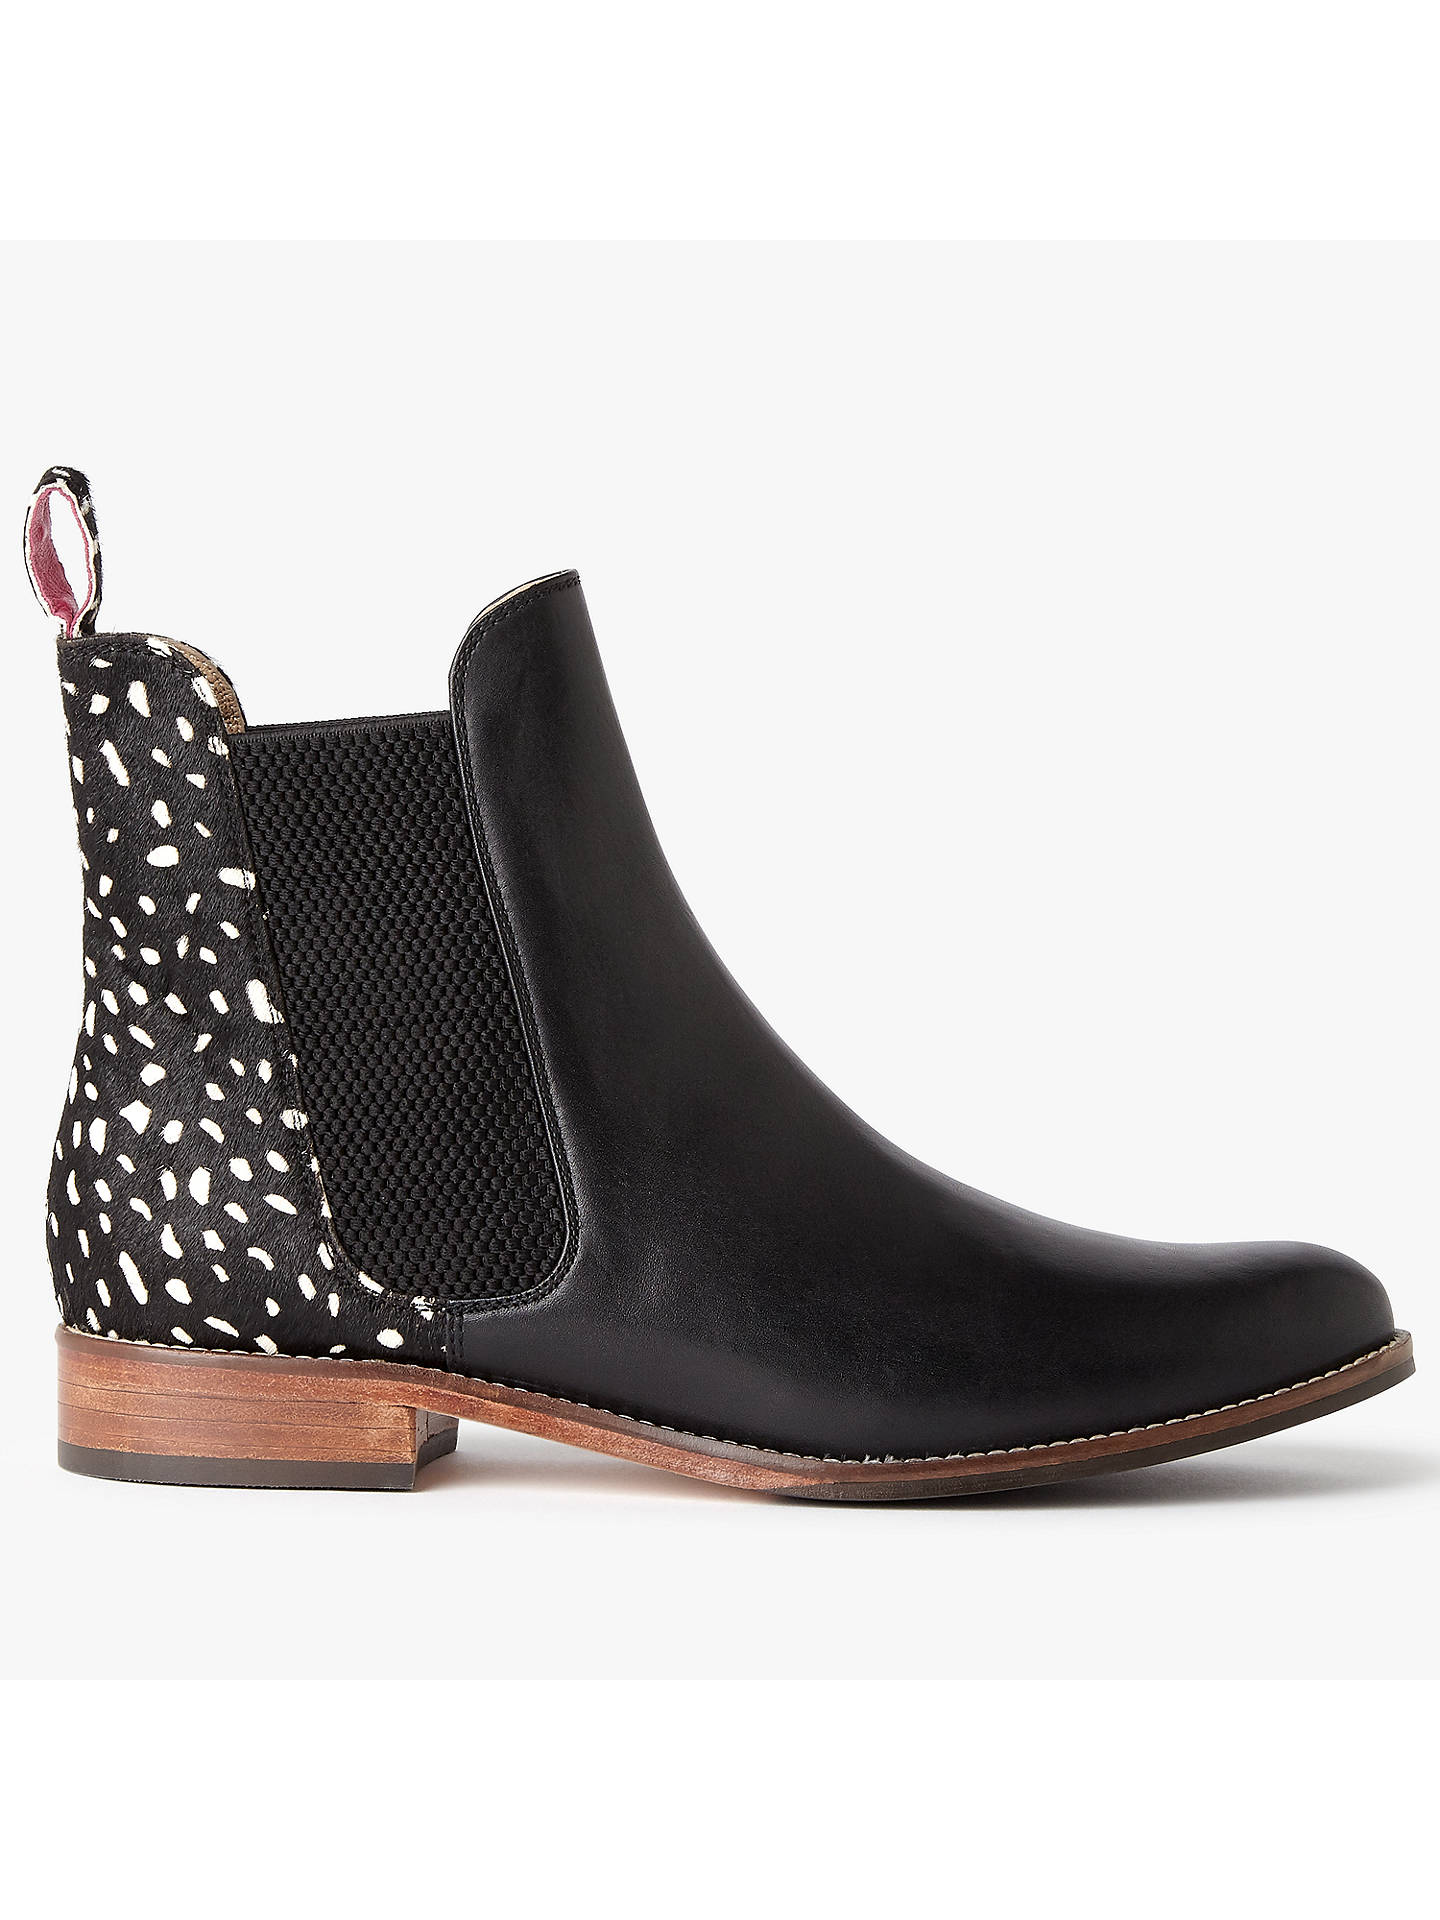 Joules Westbourne Leather Chelsea Boots, Black Spot at John Lewis ...